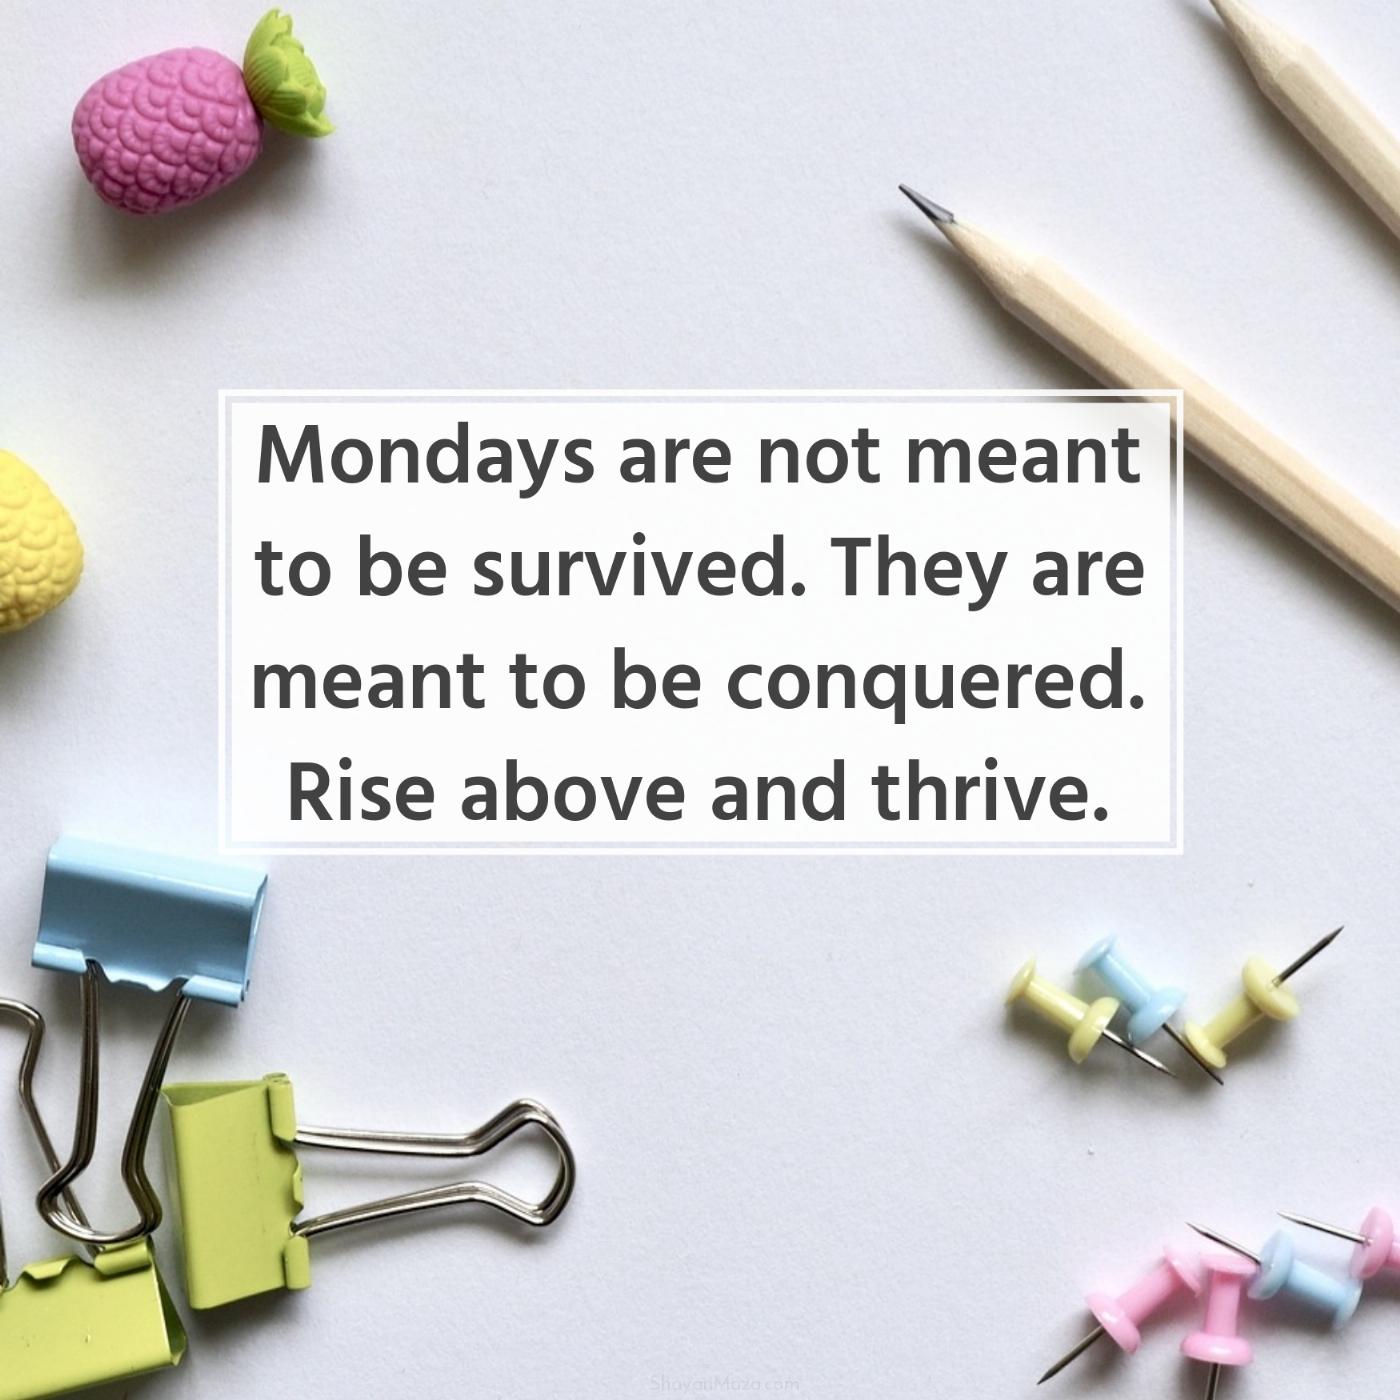 Mondays are not meant to be survived